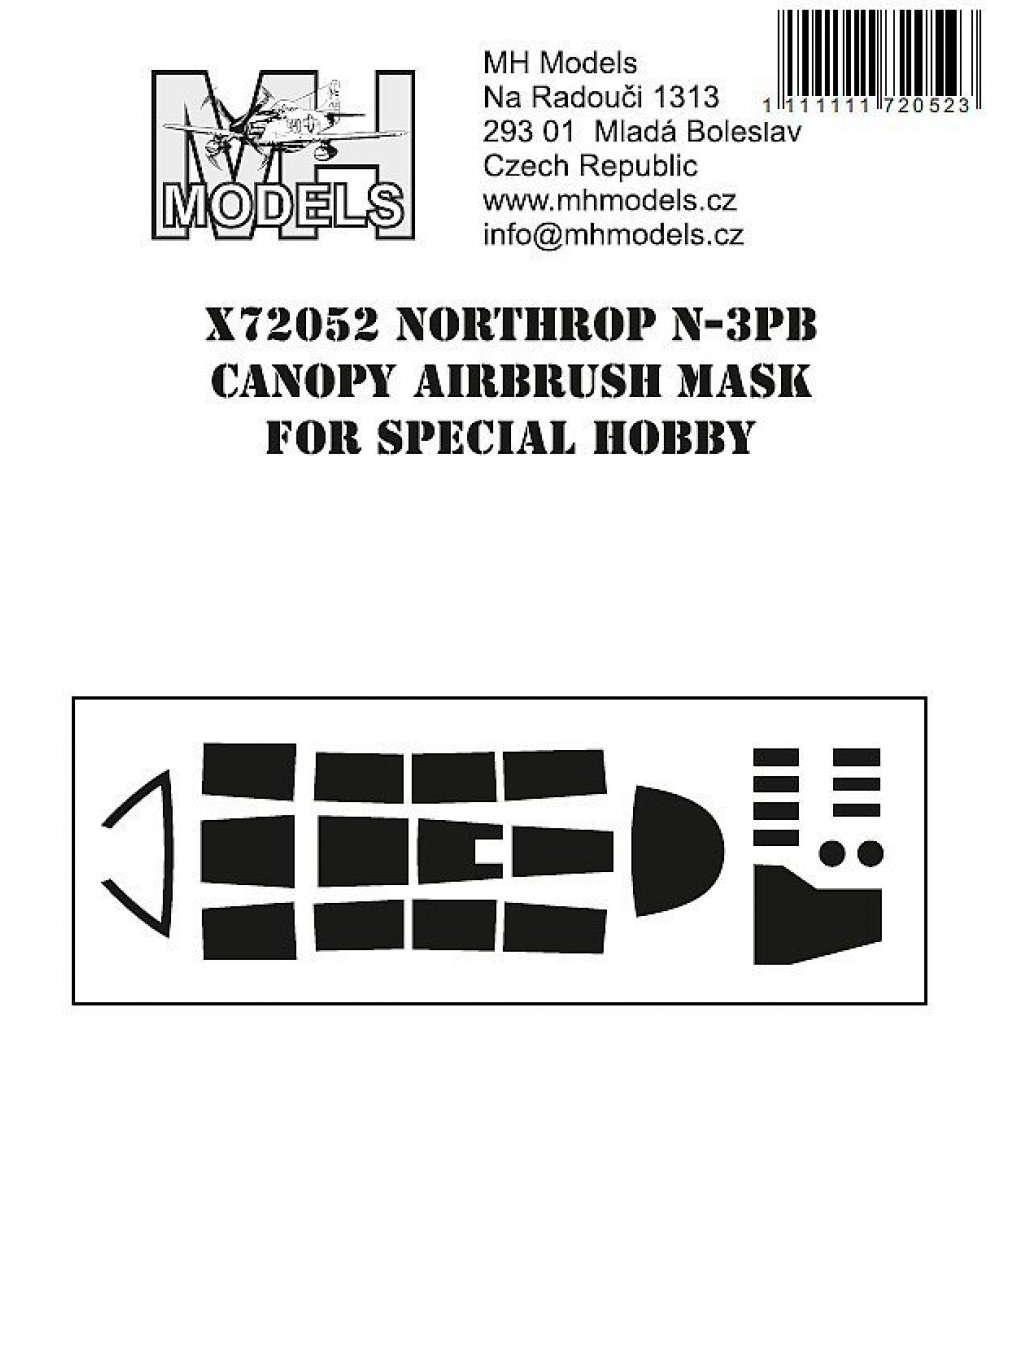 Northrop N3PB Canopy airbrush mask for Special Hobby